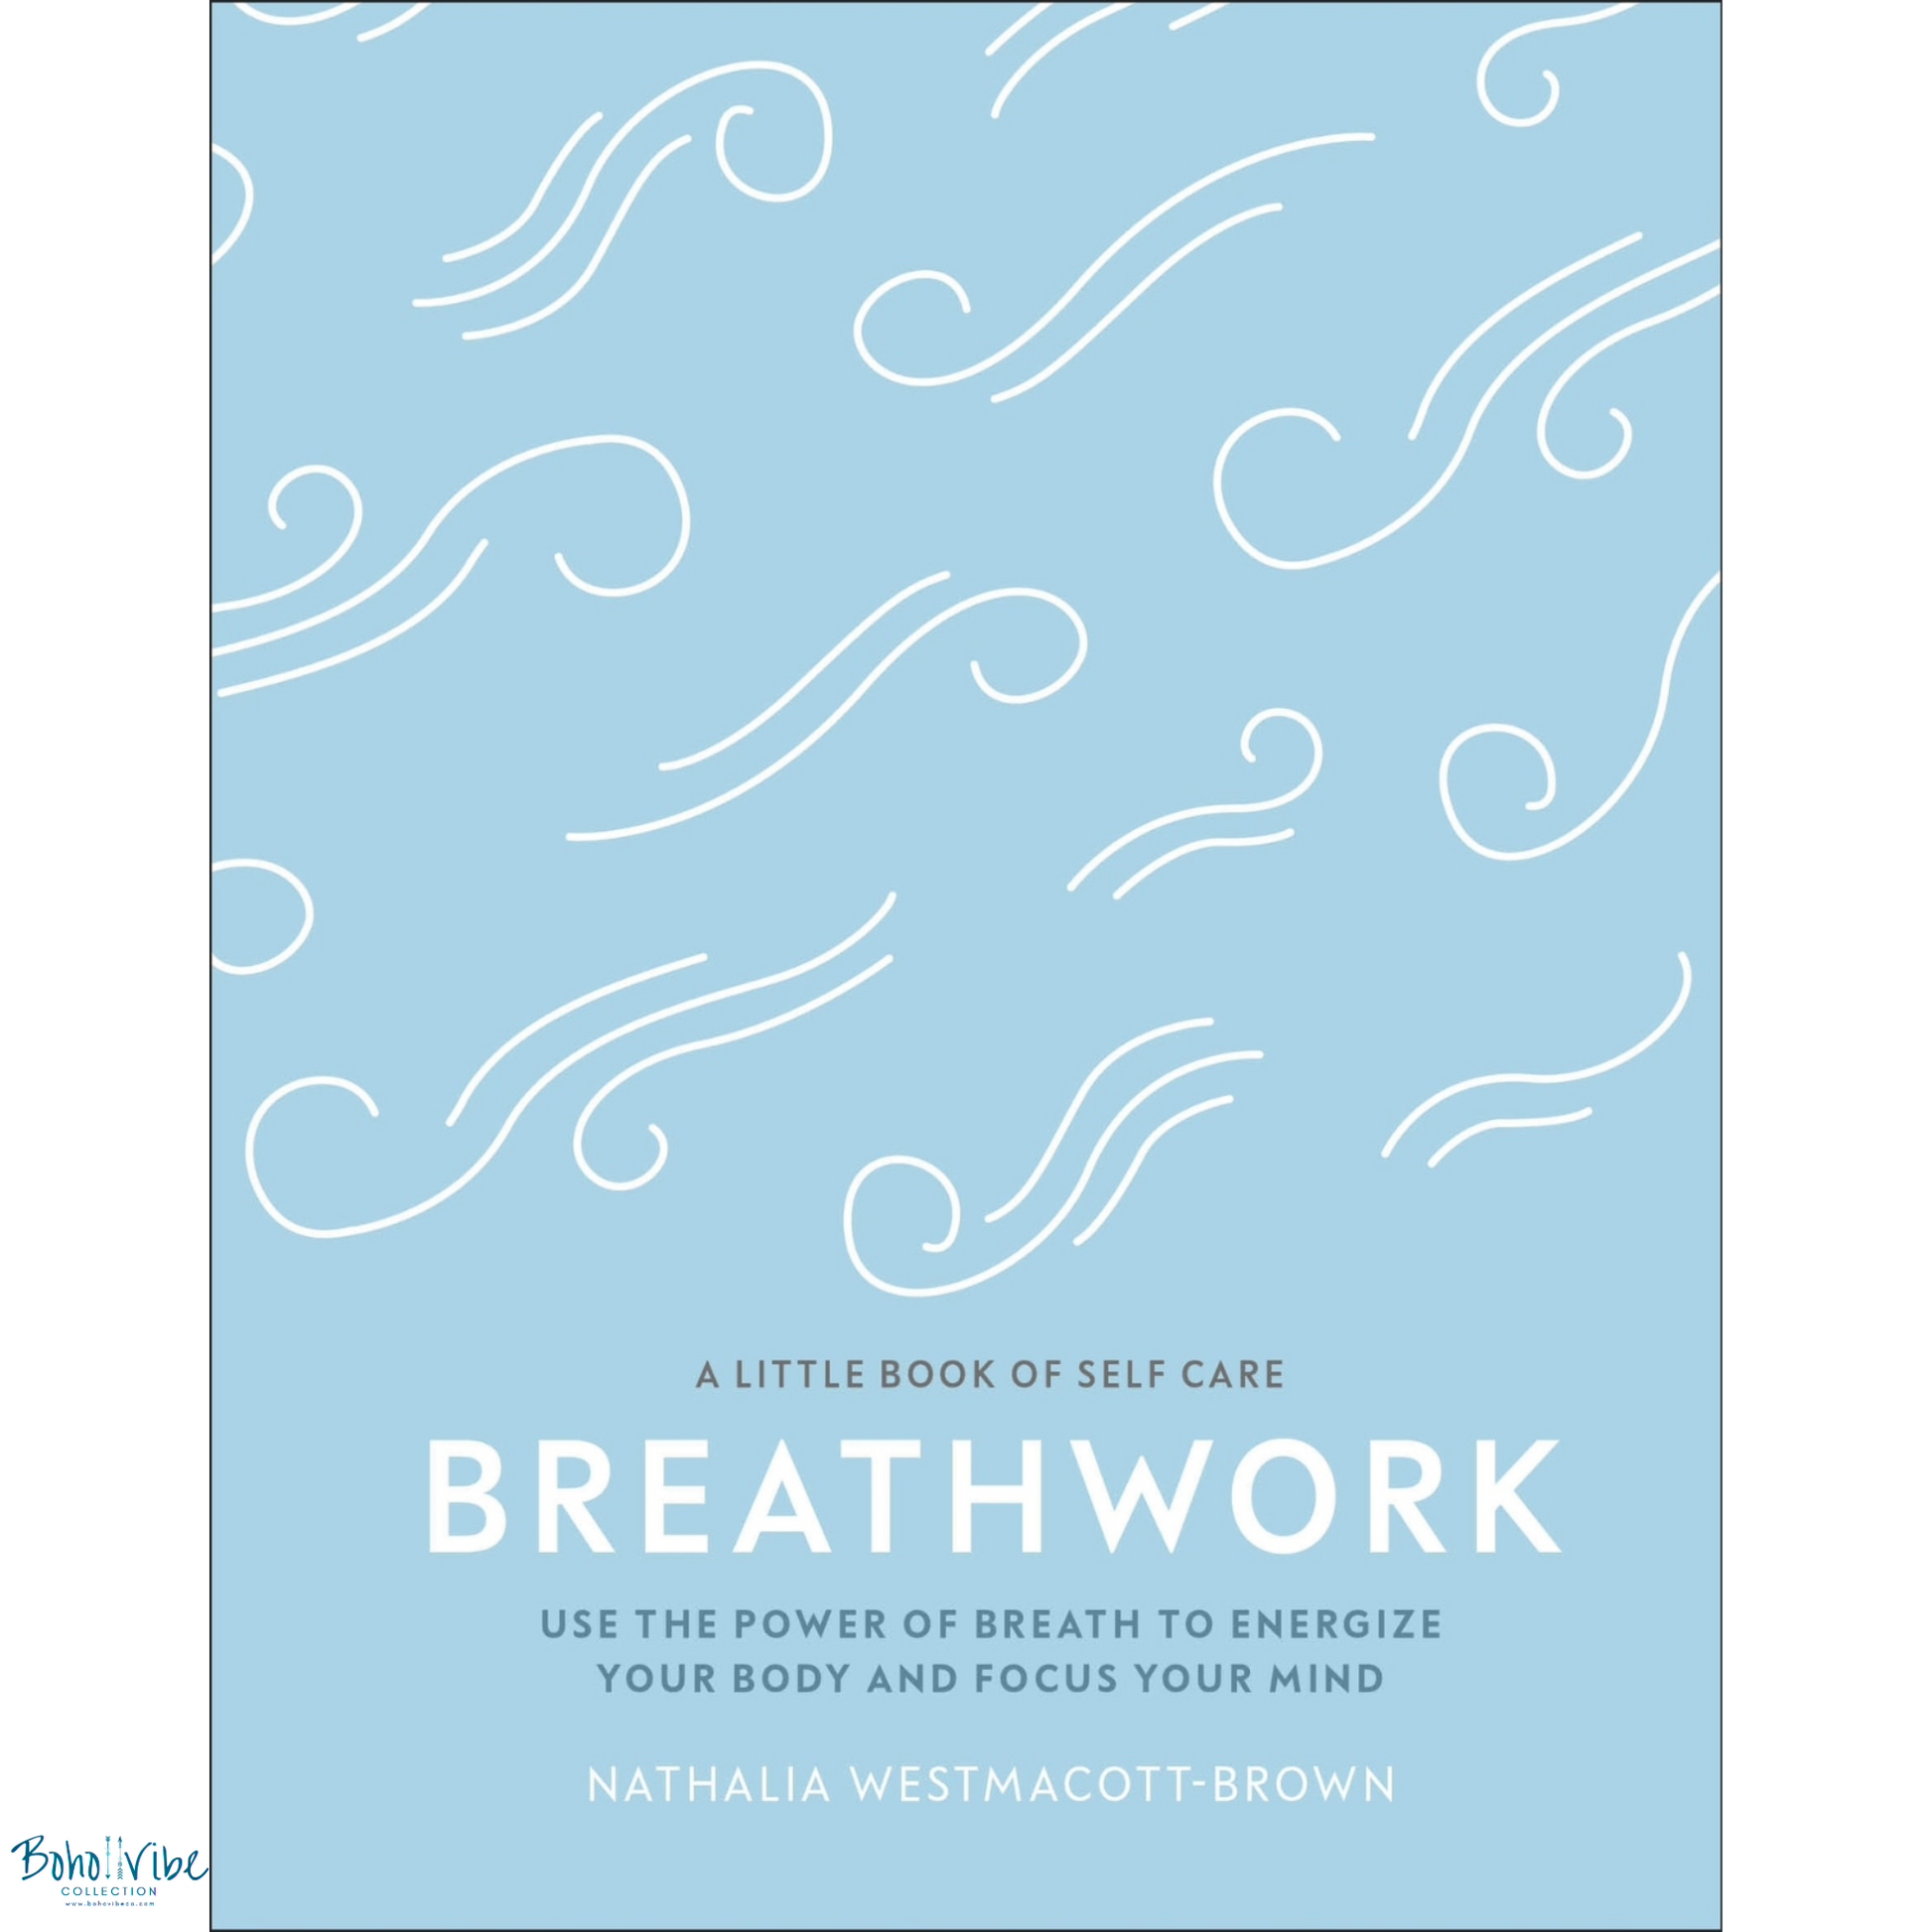 Boho ↡↟ Vibe Collection ↠ Breathwork - Use The Power Of Breath To Energise Your Body And Focus Your Mind 